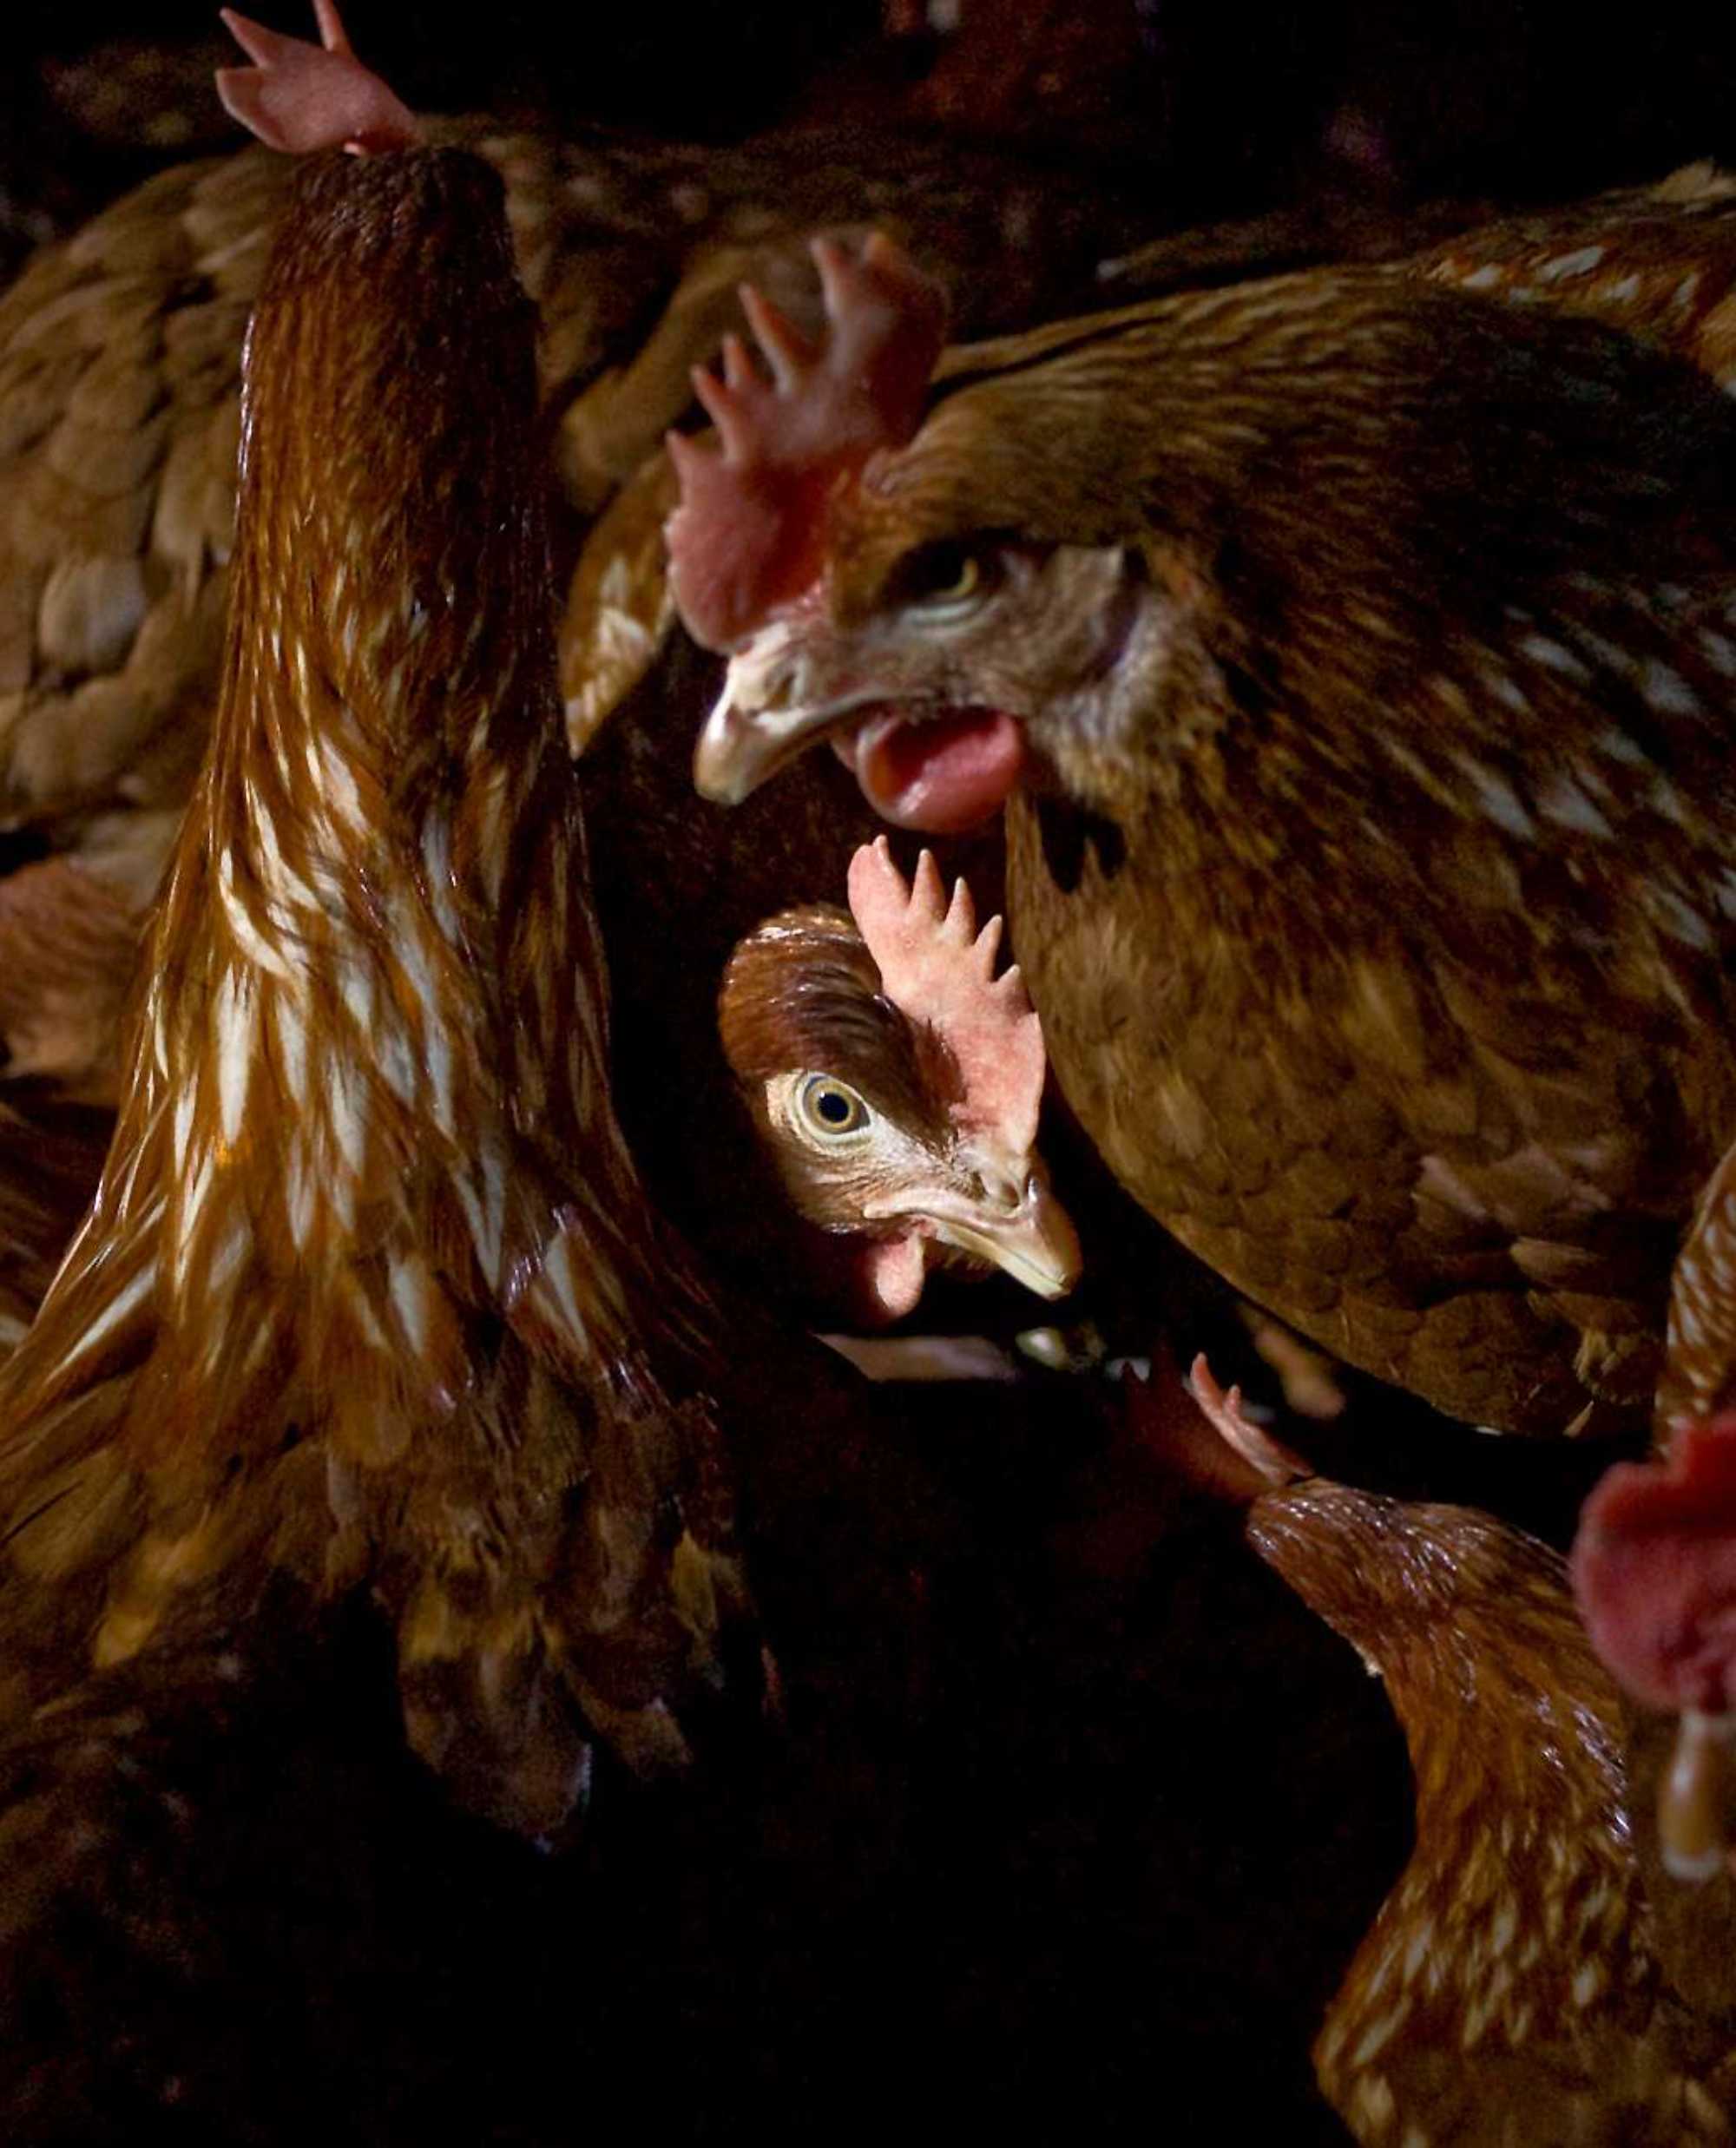 Distressed hens climb over each other.